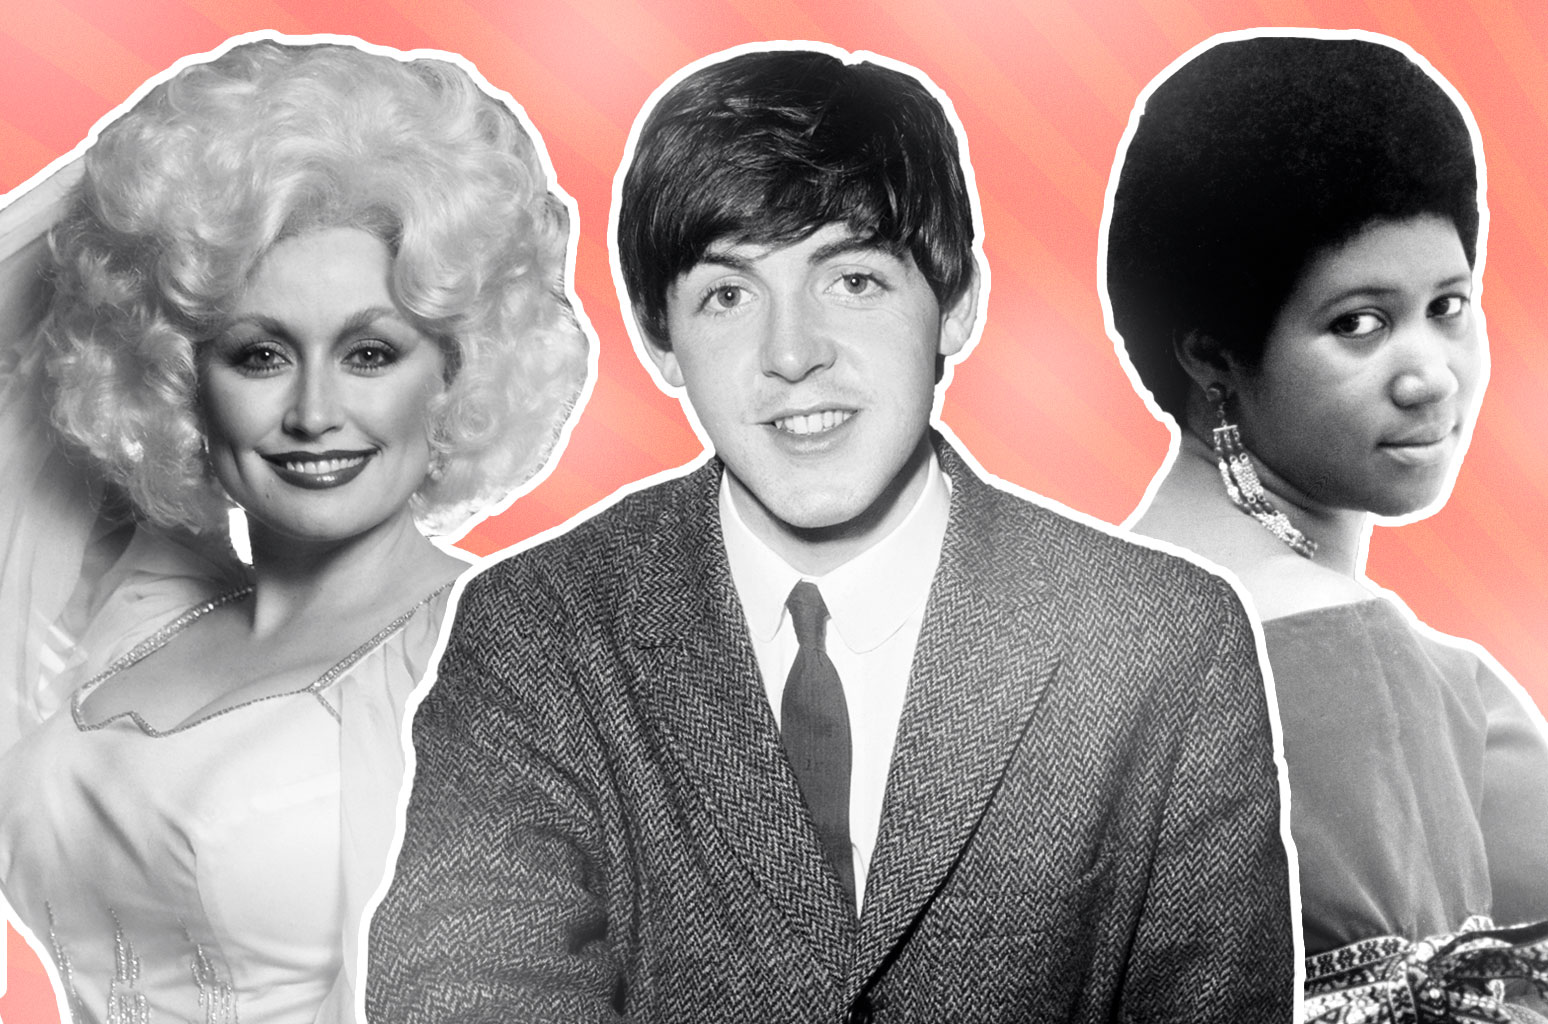 John Williams, Dolly Parton, Paul McCartney &amp; More Artists Nominated for Grammys in 25 or More Years - www.billboard.com